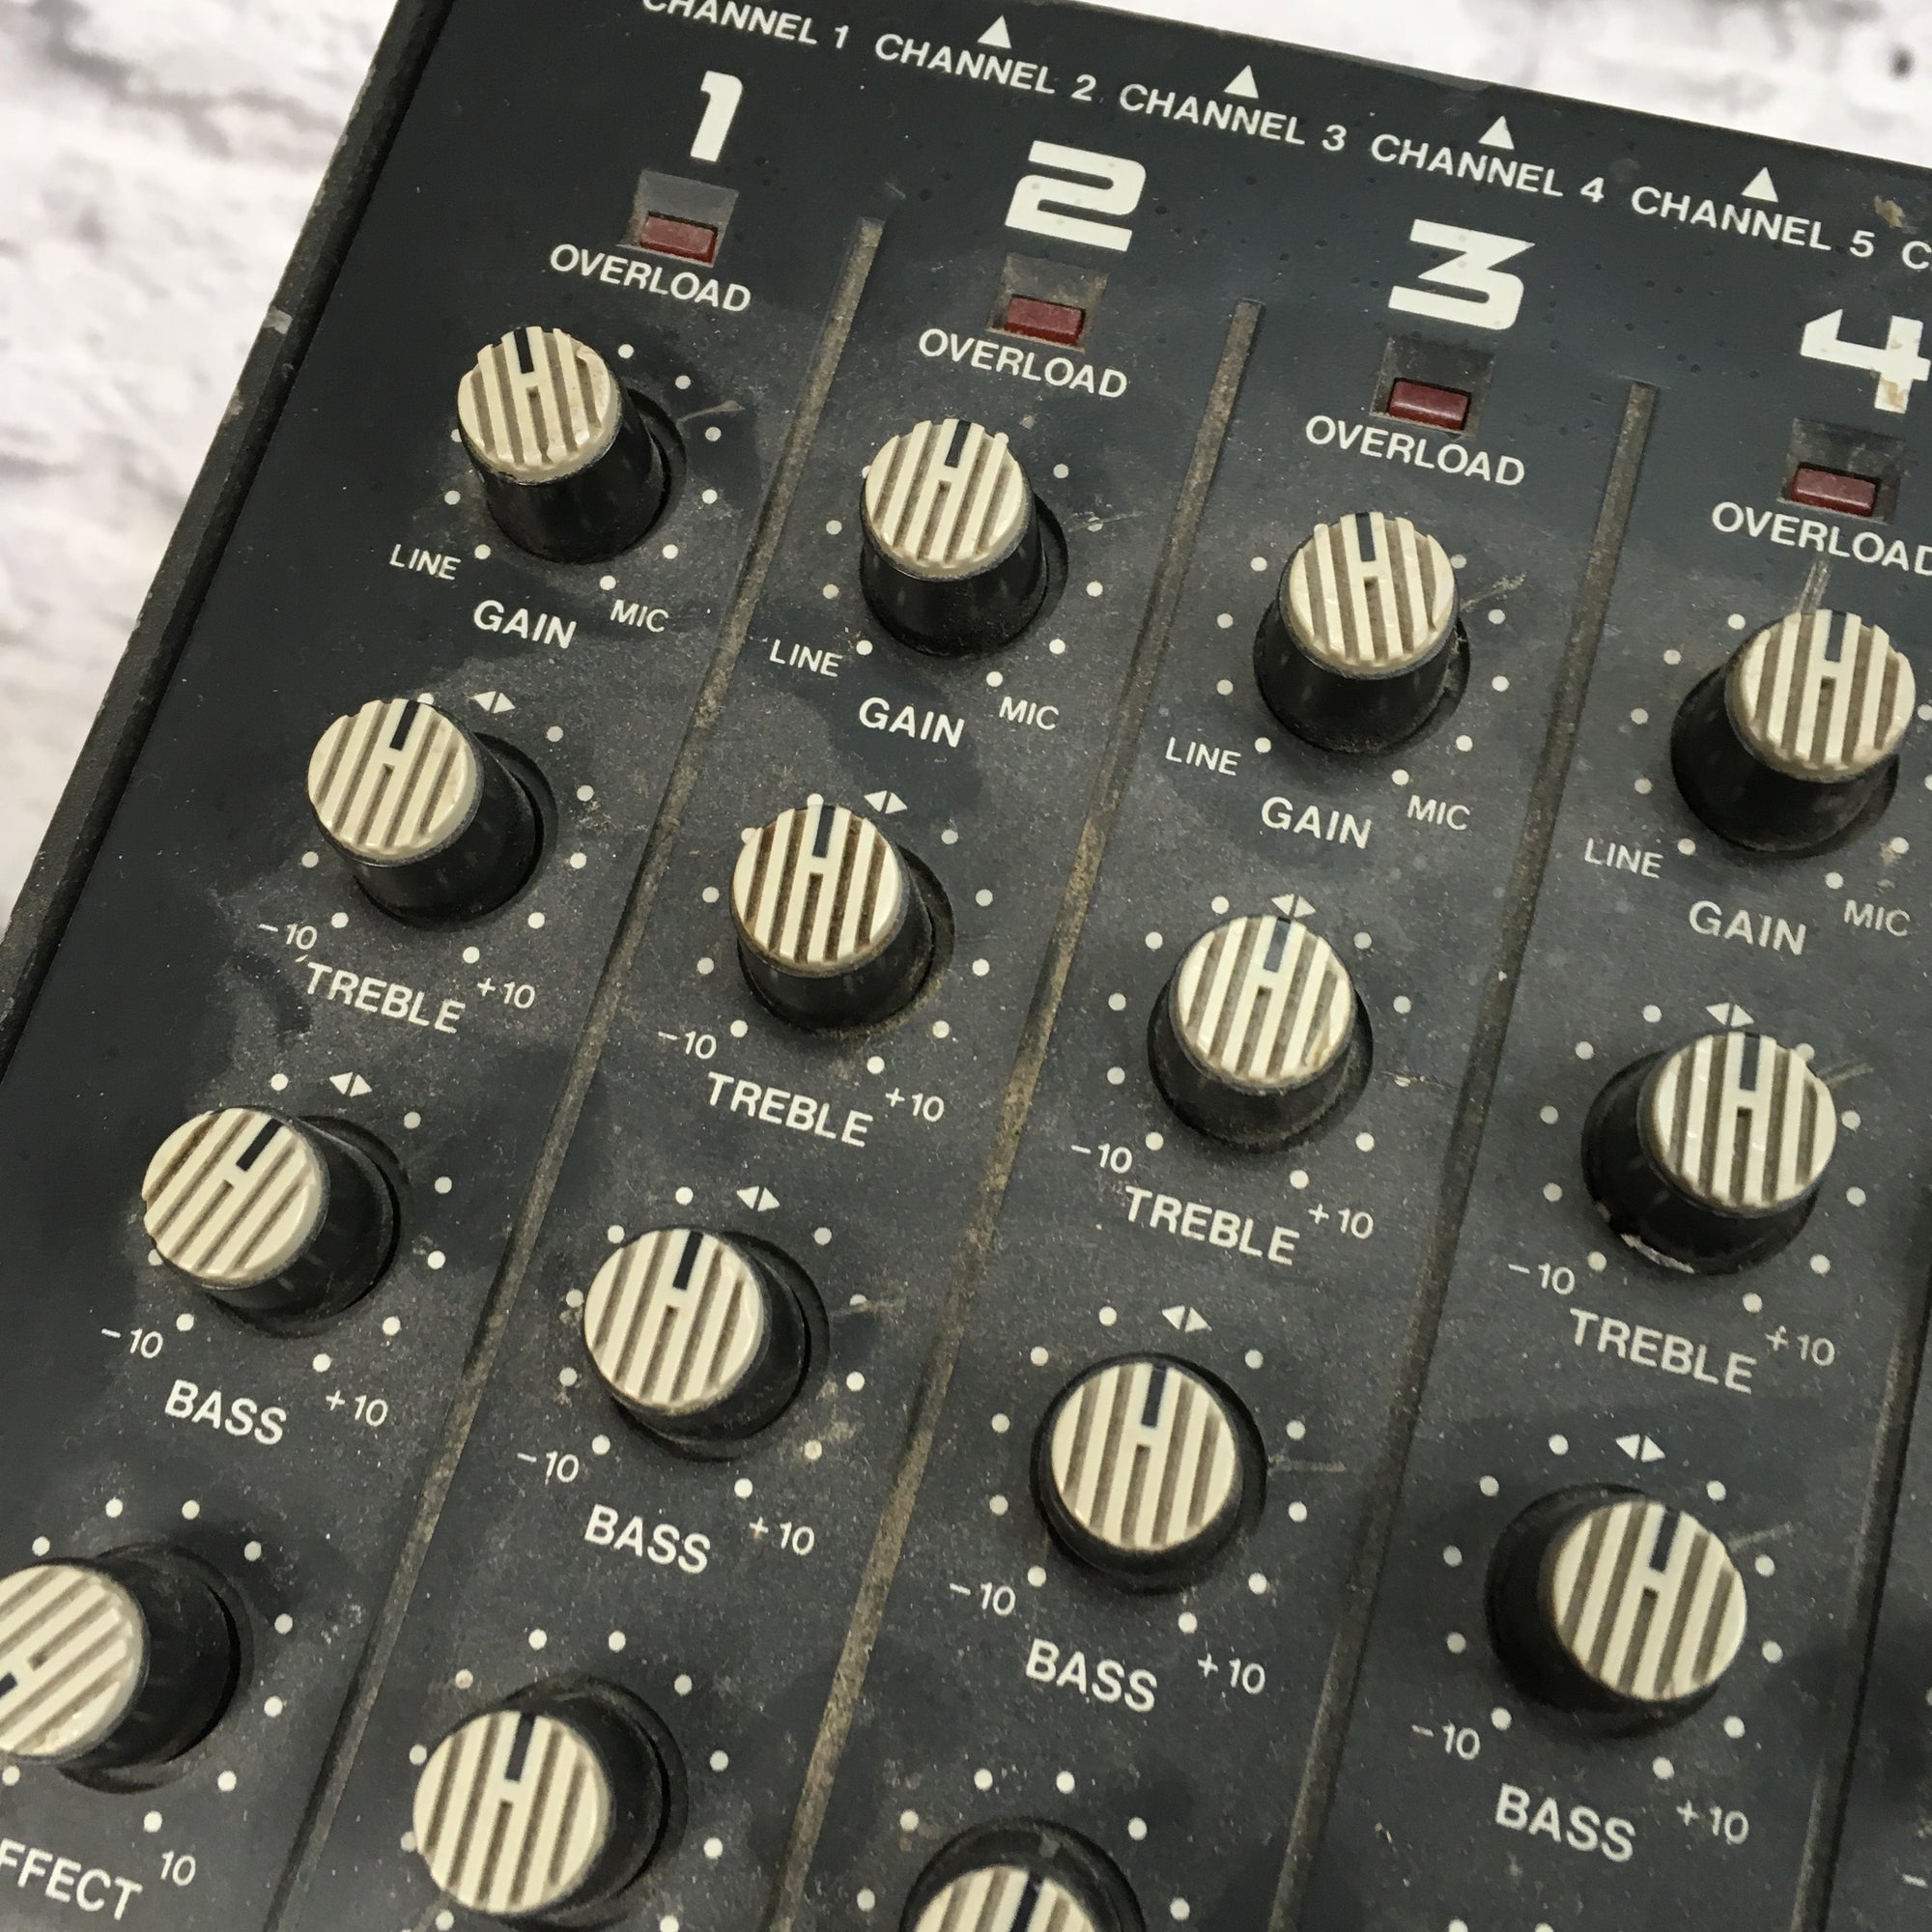 sammenbrud sikkert Nysgerrighed Roland CPM-120 Powered Mixer - Evolution Music